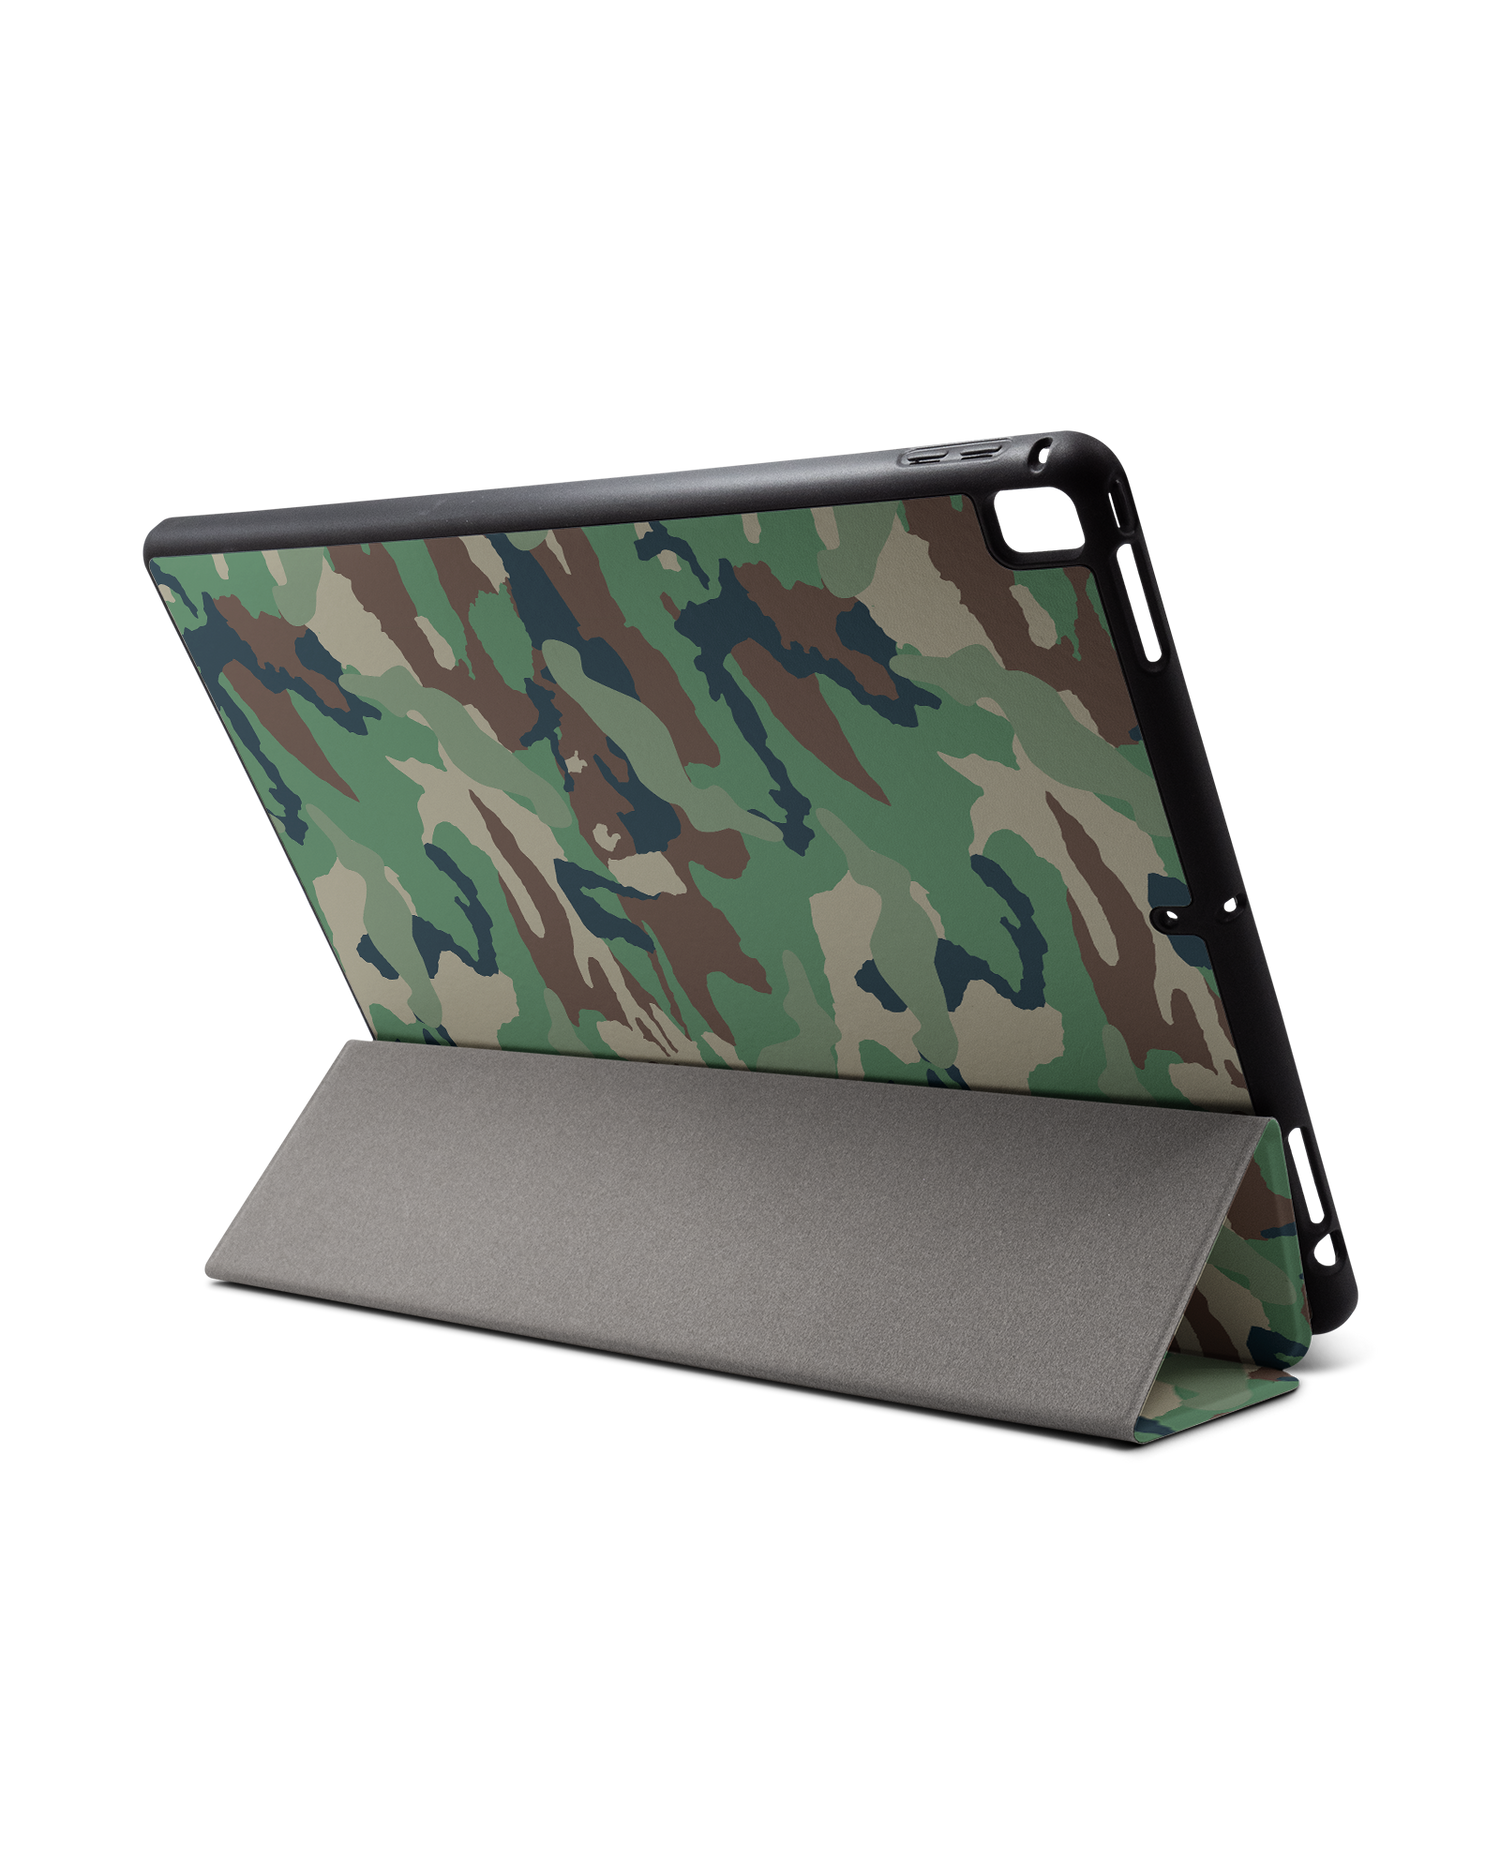 Green and Brown Camo iPad Case with Pencil Holder for Apple iPad Pro 2 12.9